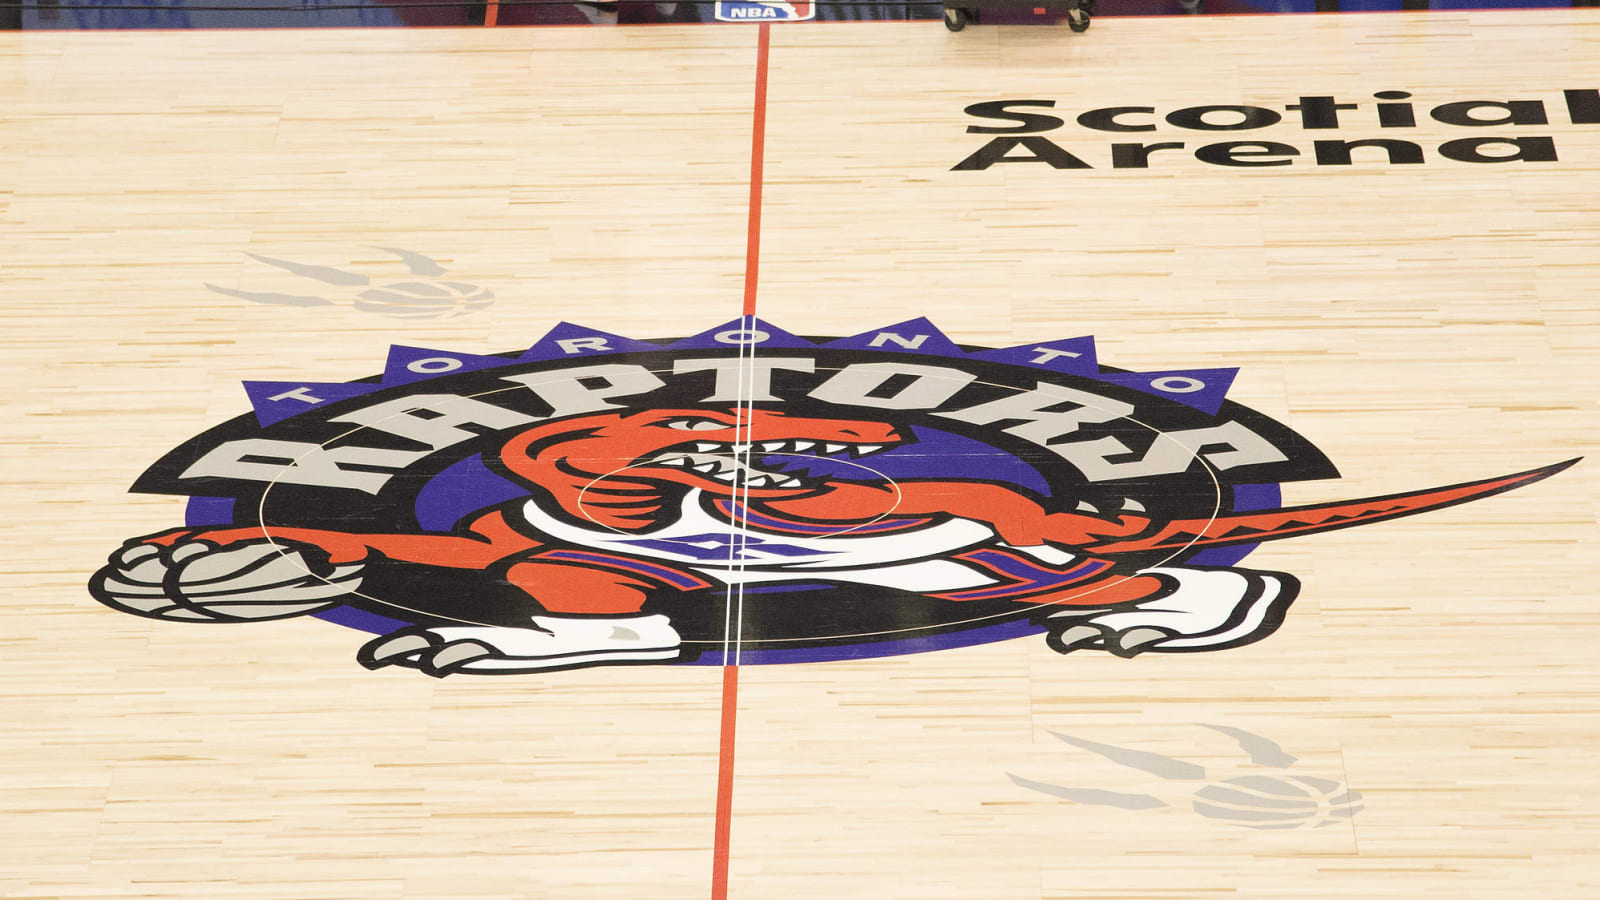 Reports: Raptors could relocate to Tampa if Toronto is out